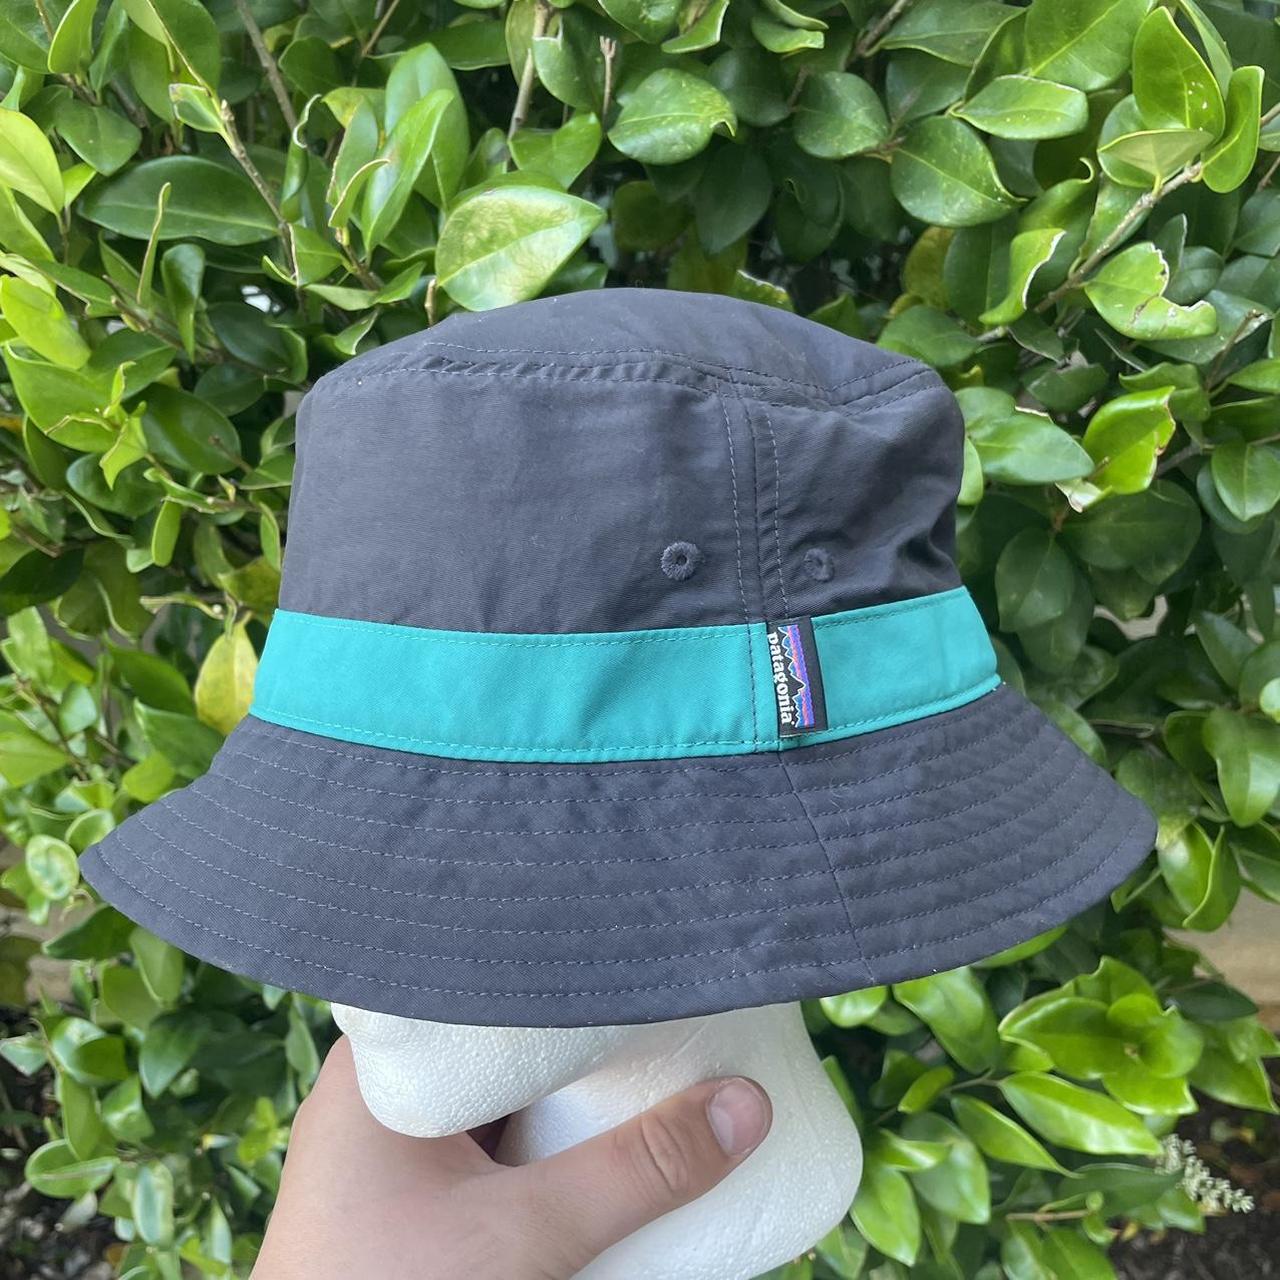 Patagonia bucket hat! Please message me if you have